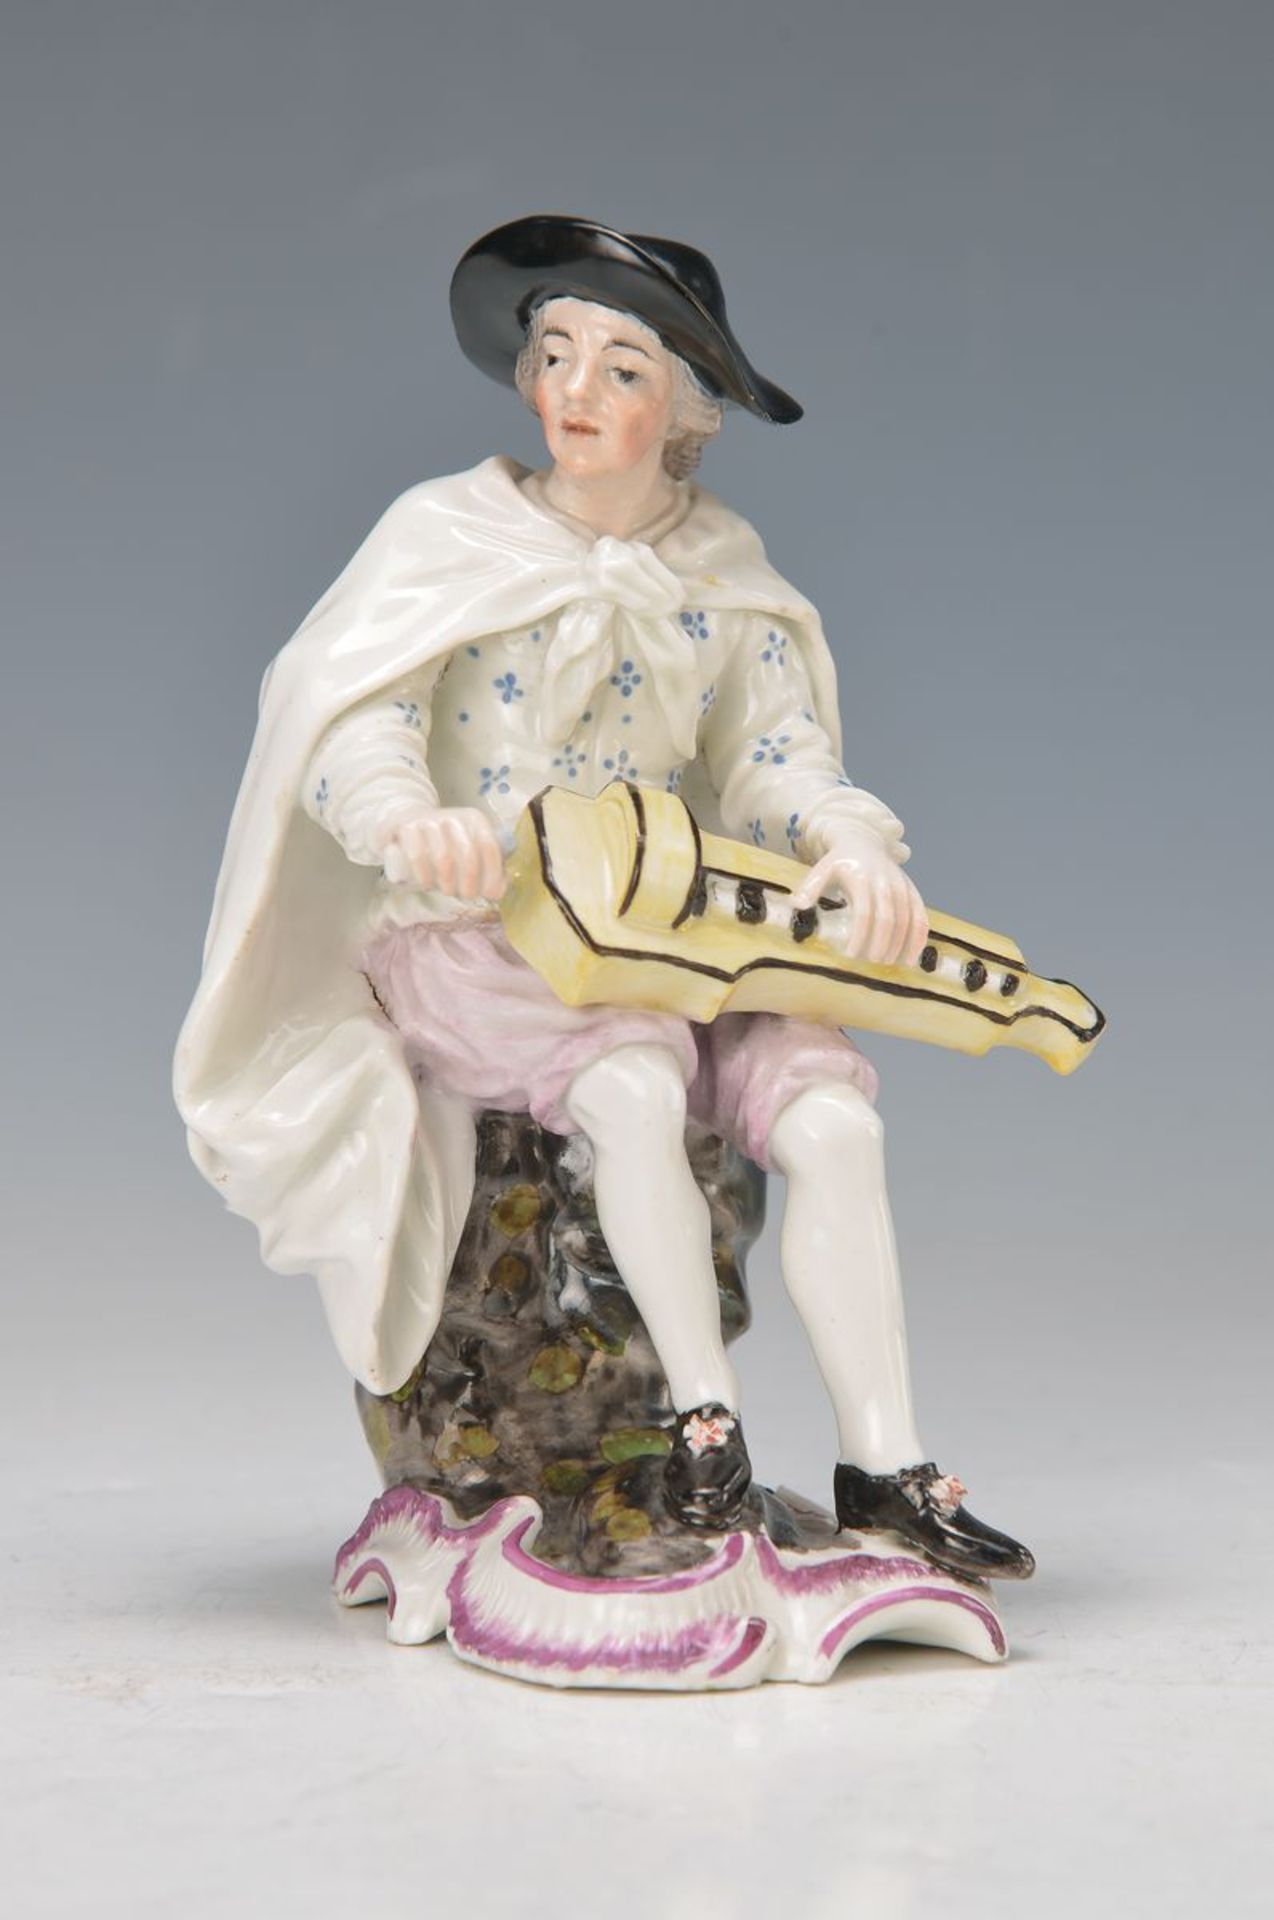 figurine, Frankenthal, around 1757/59, of a series of the peasant minstrel, here: musician with